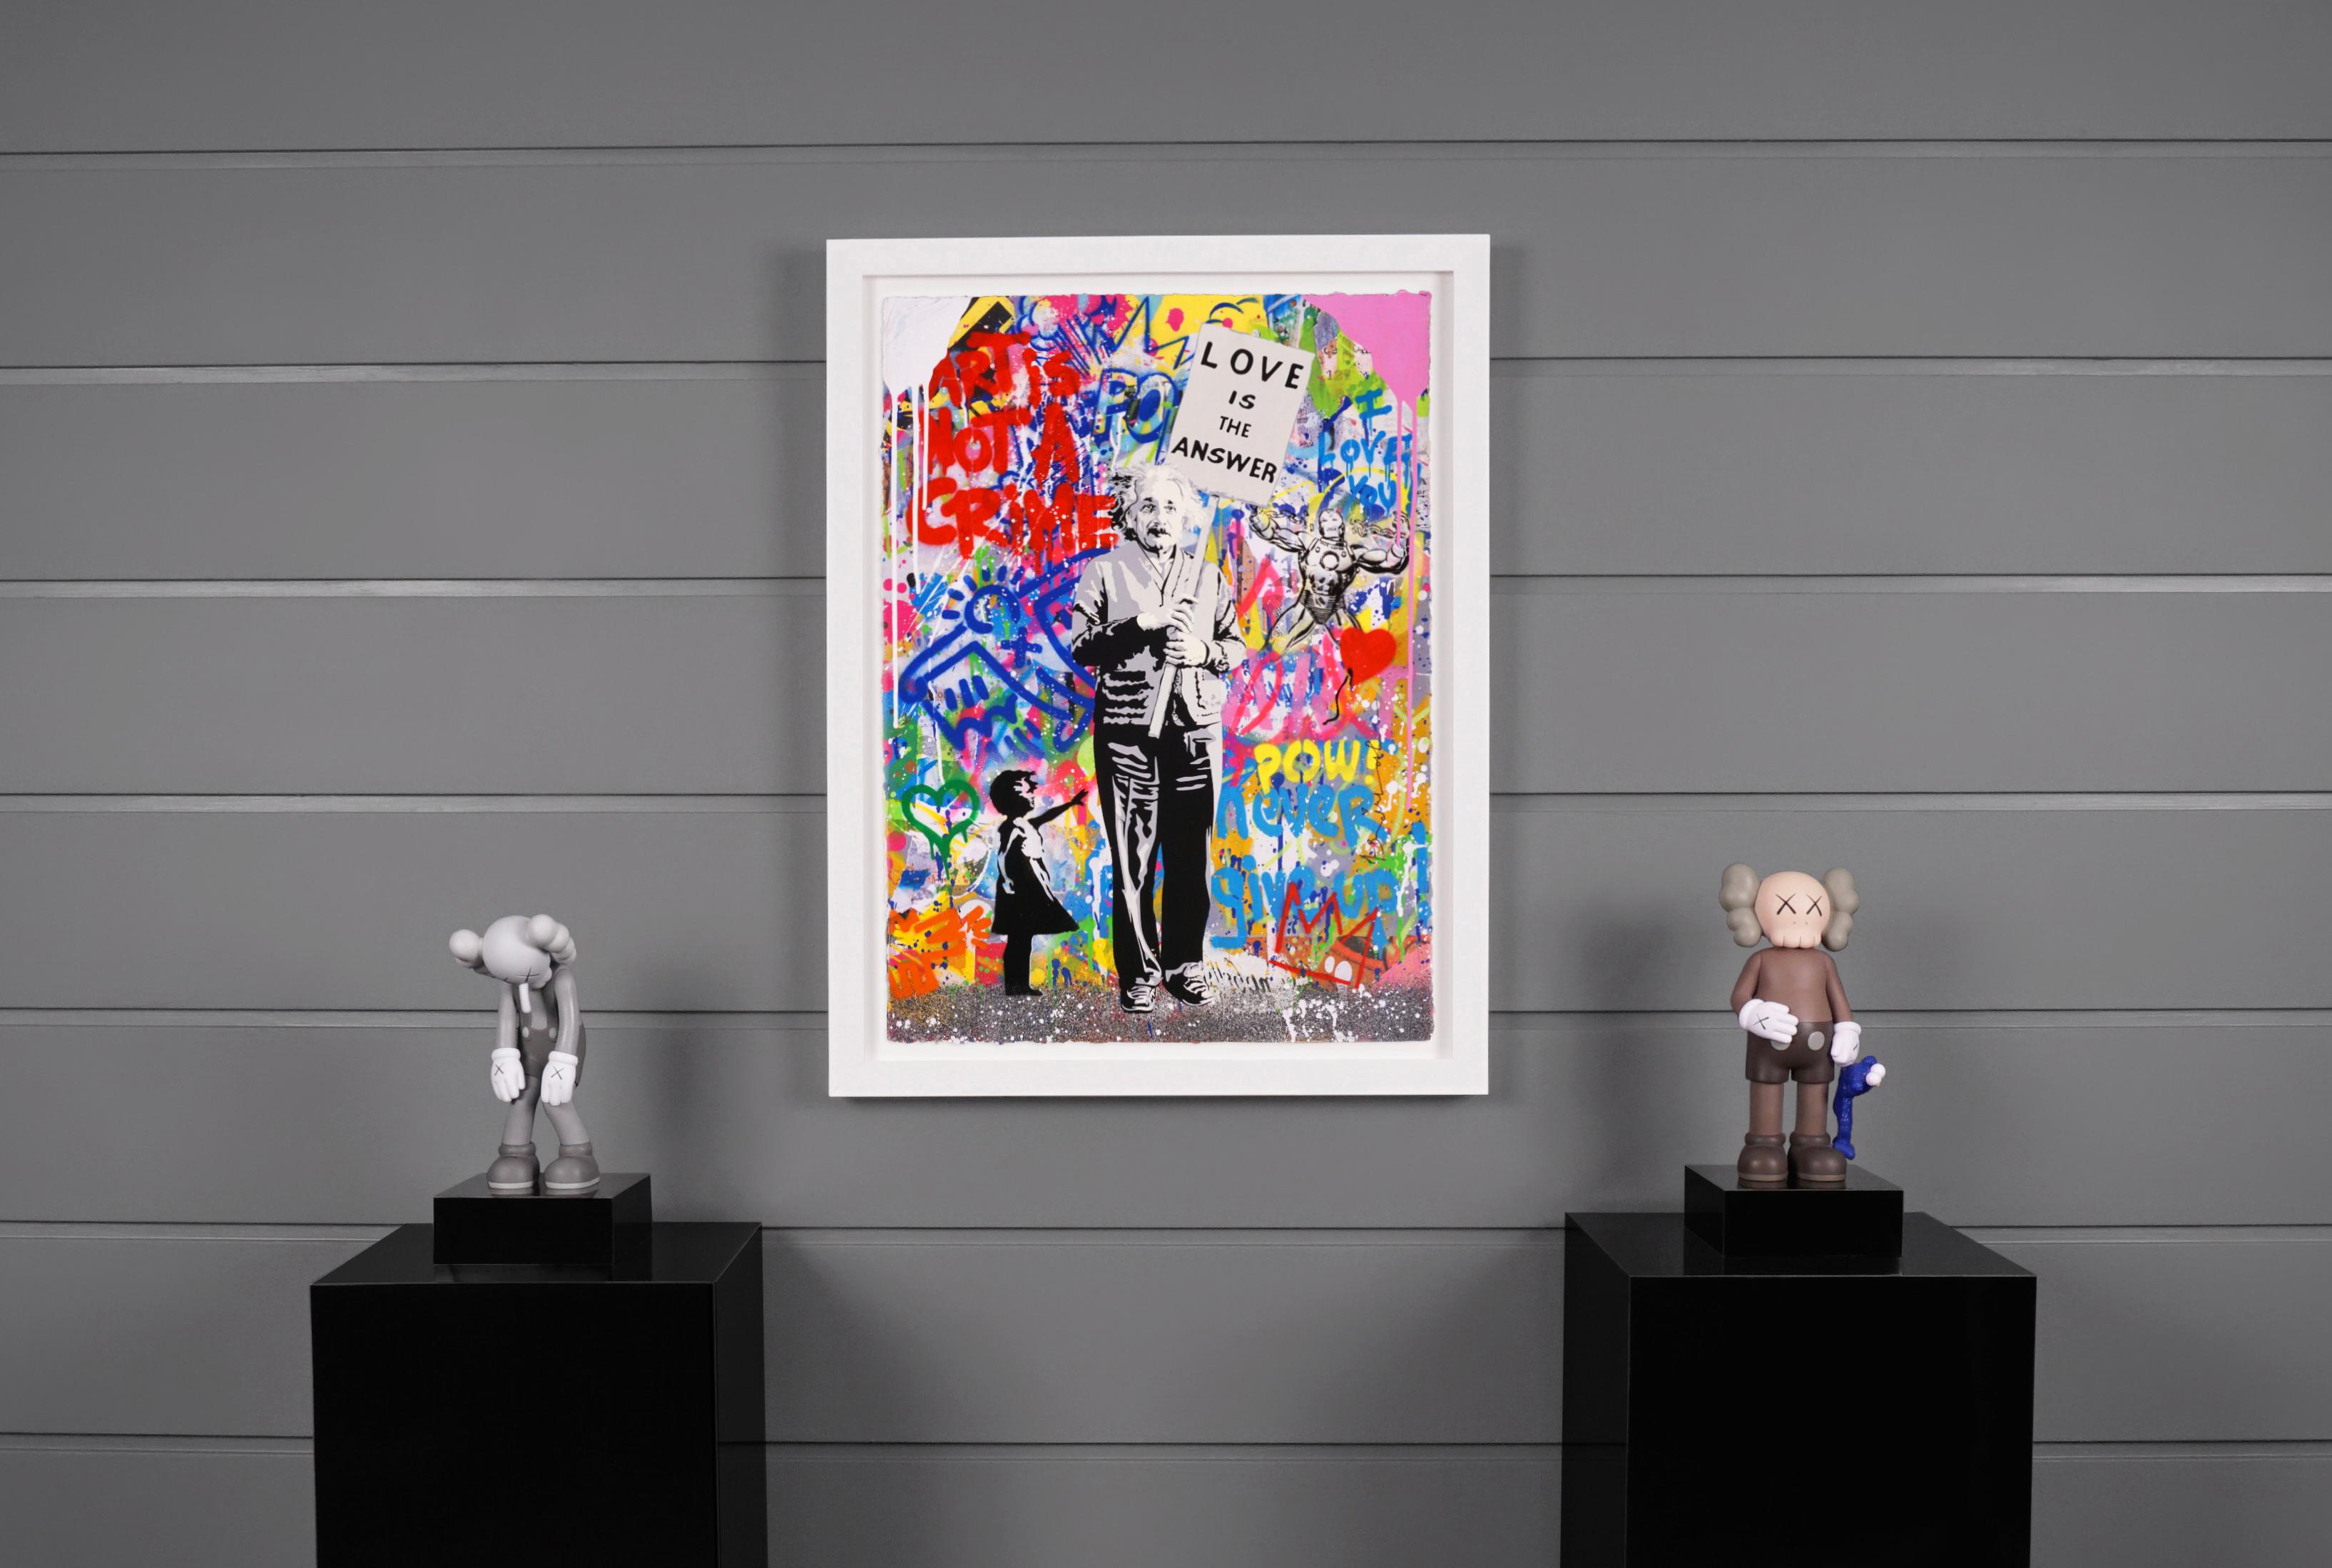 The graffiti street-art meets fine-art 'Art Is Not A Crime' is a pop art masterpiece made with acrylic paint, stencil, and mixed media on paper, created in 2021 by contemporary street-artist, Mr. Brainwash. The bold stenciled text, layers of